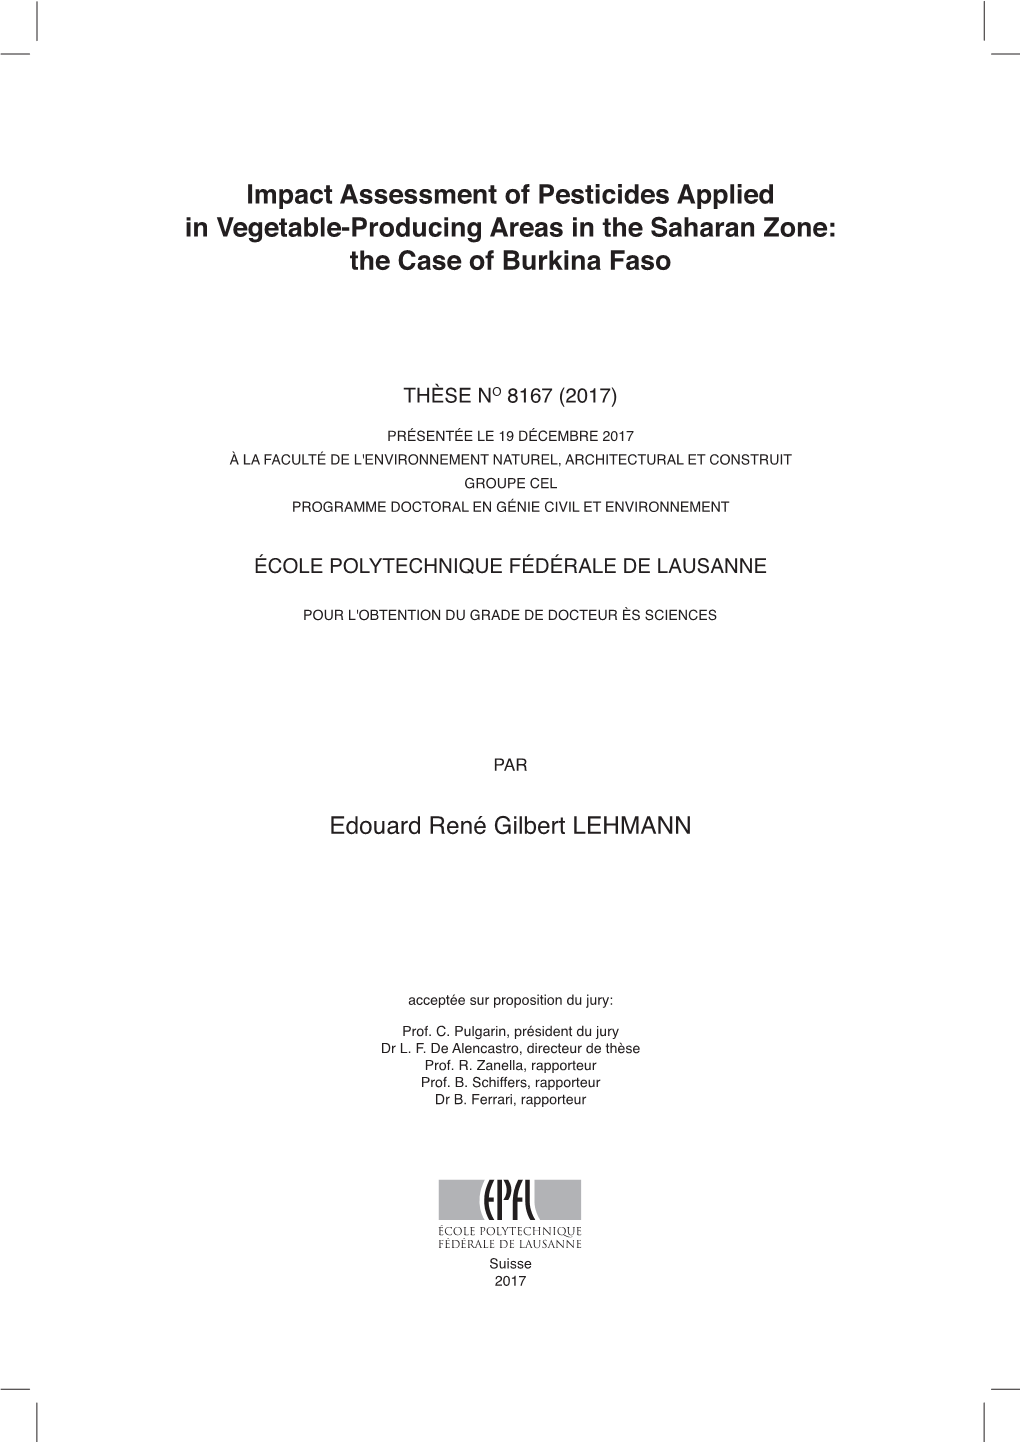 Impact Assessment of Pesticides Applied in Vegetable-Producing Areas in the Saharan Zone: the Case of Burkina Faso